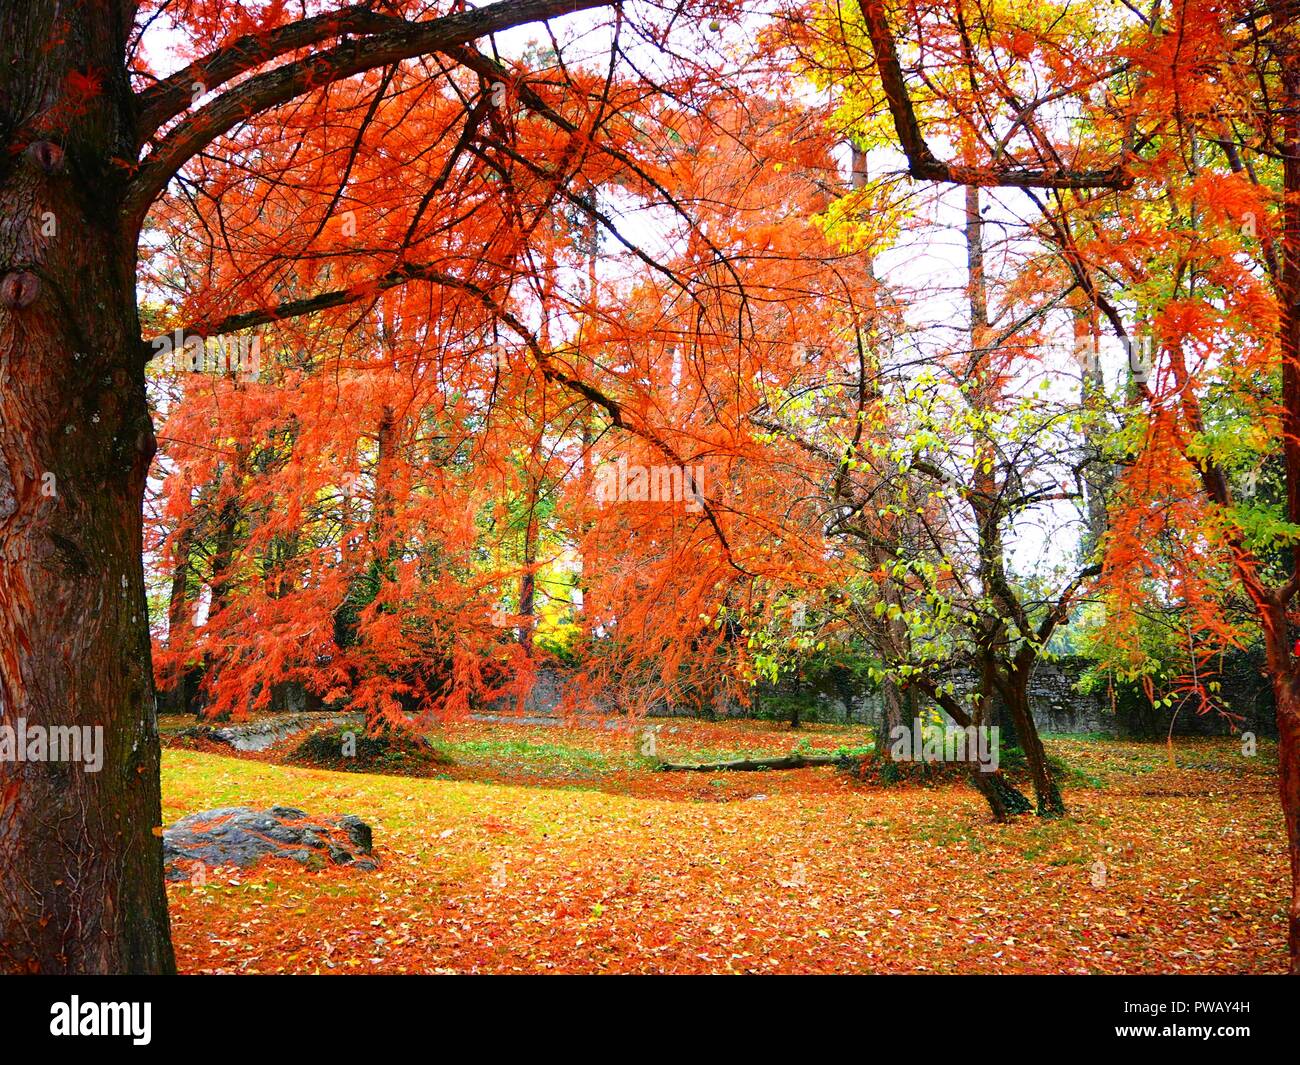 Autumn colours, bright red and yellow leaves Stock Photo